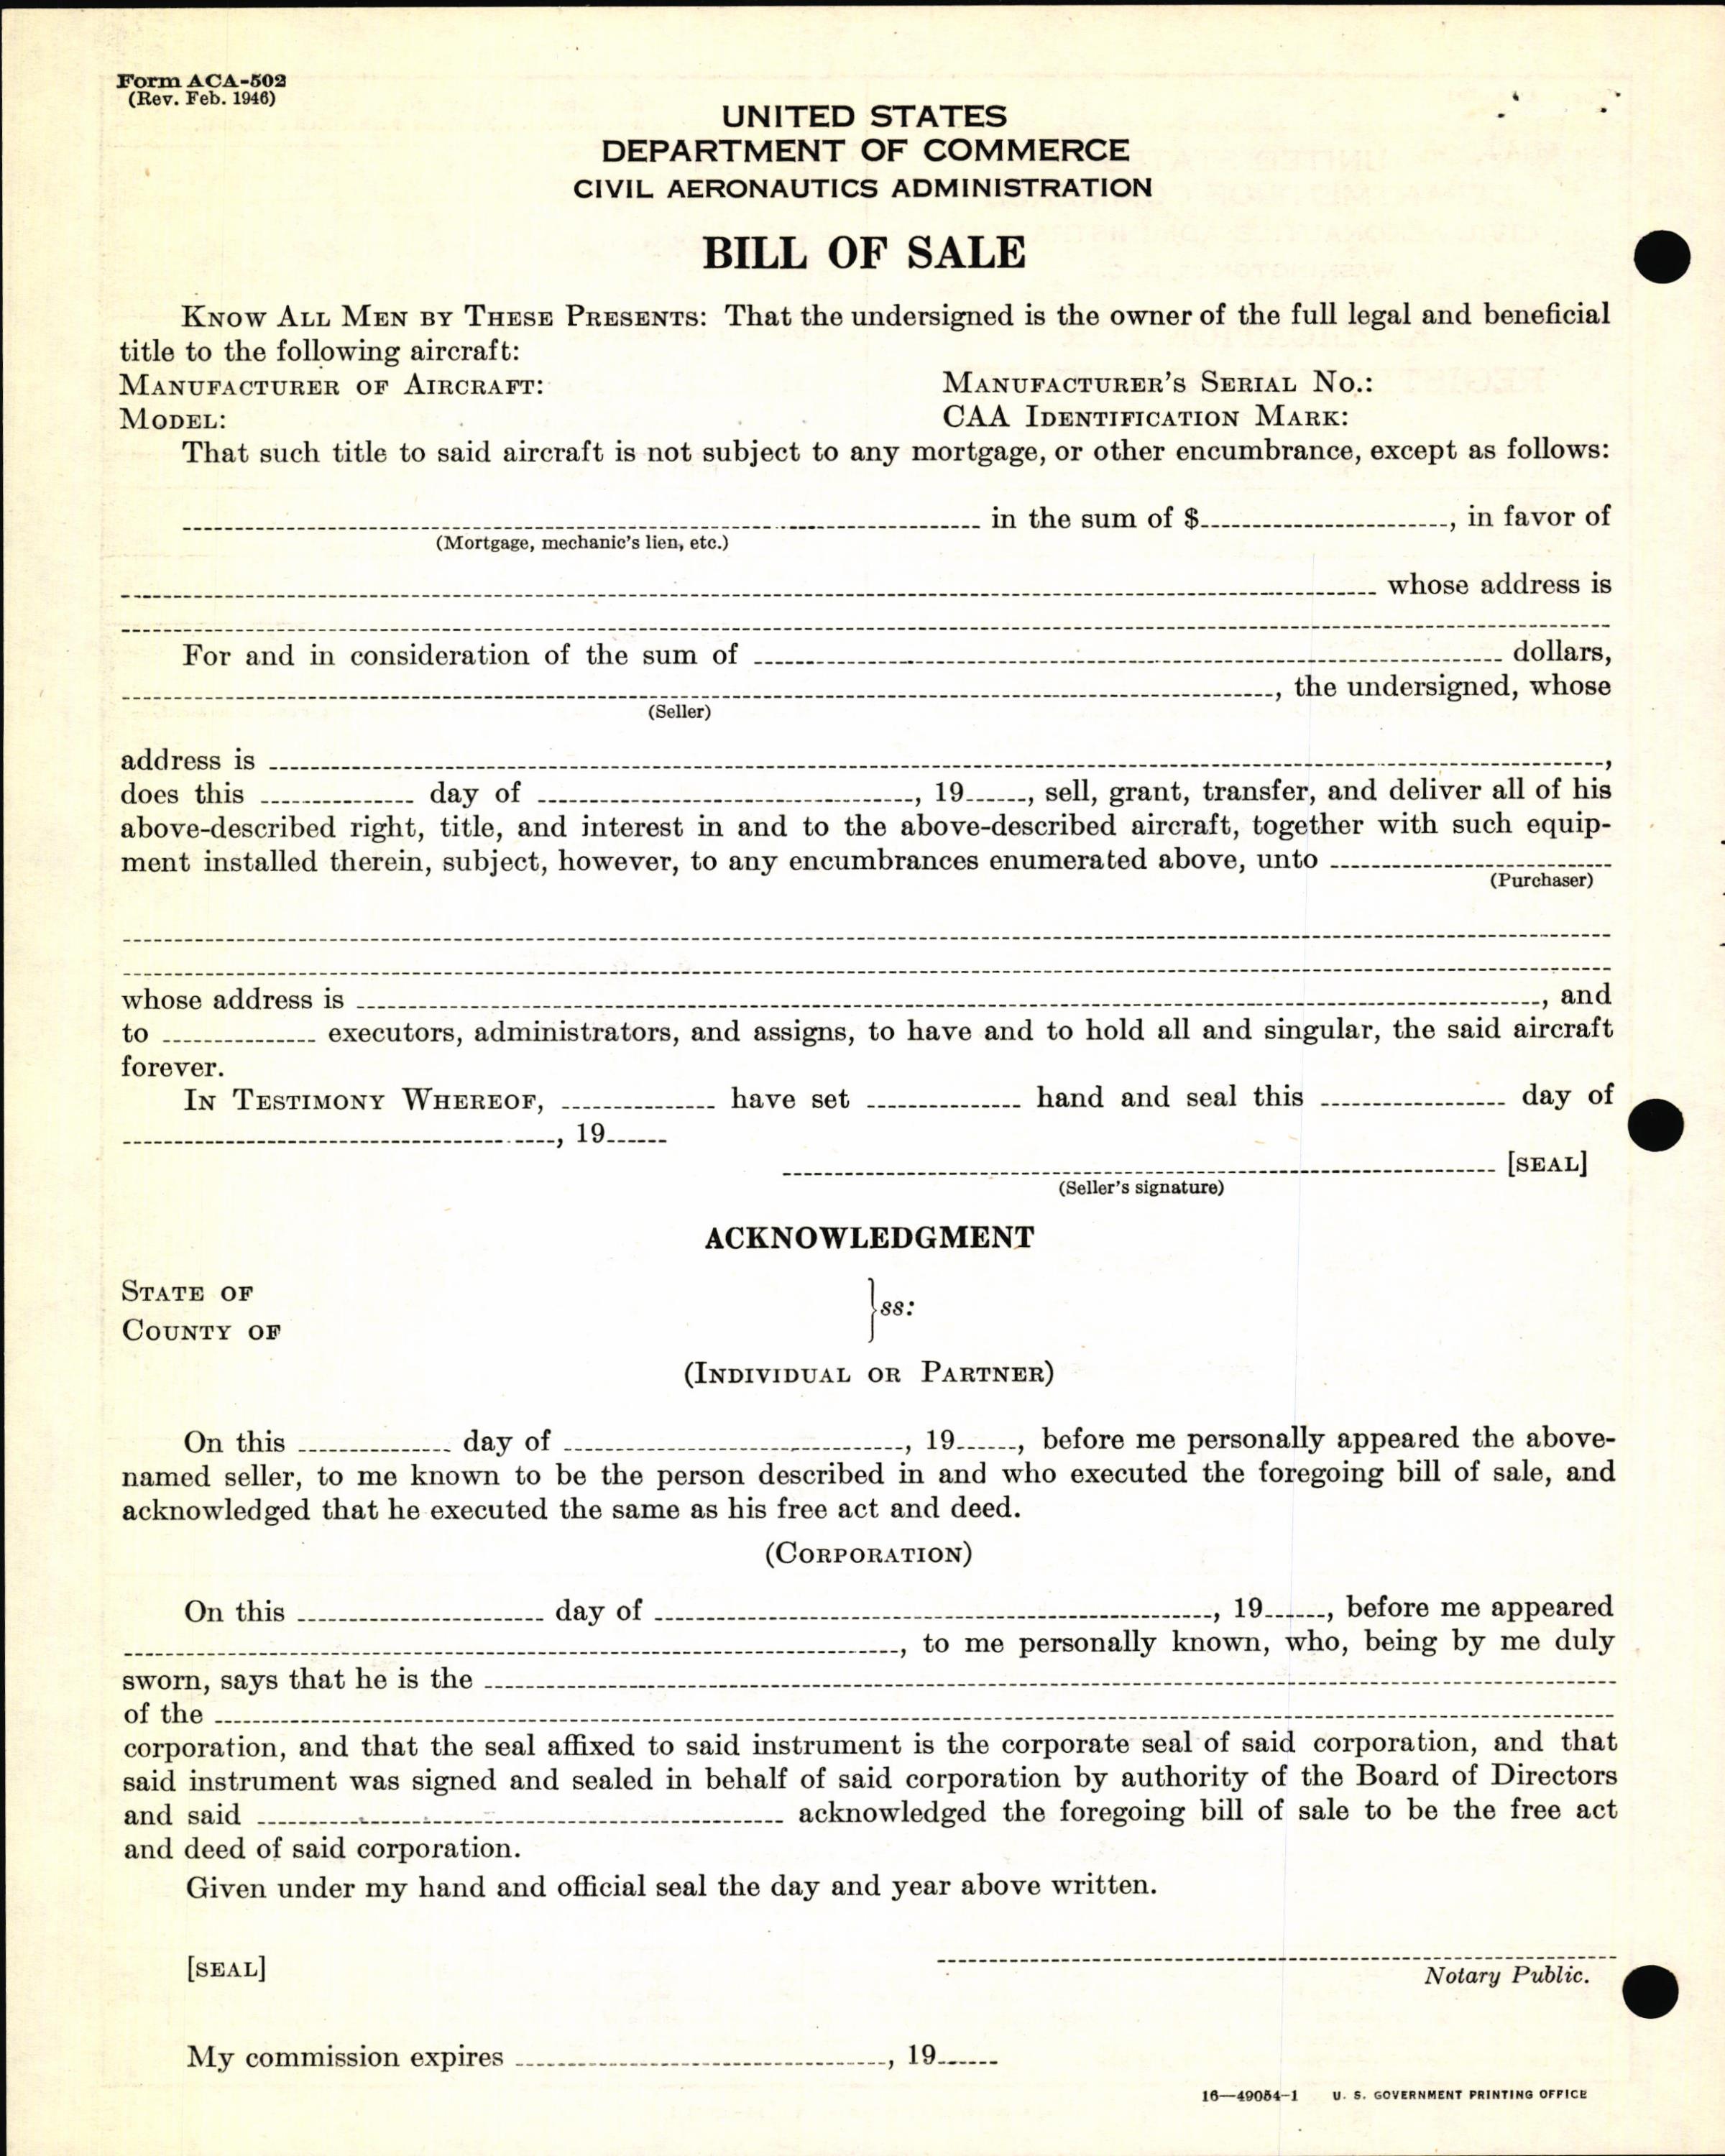 Sample page 4 from AirCorps Library document: Technical Information for Serial Number 1233